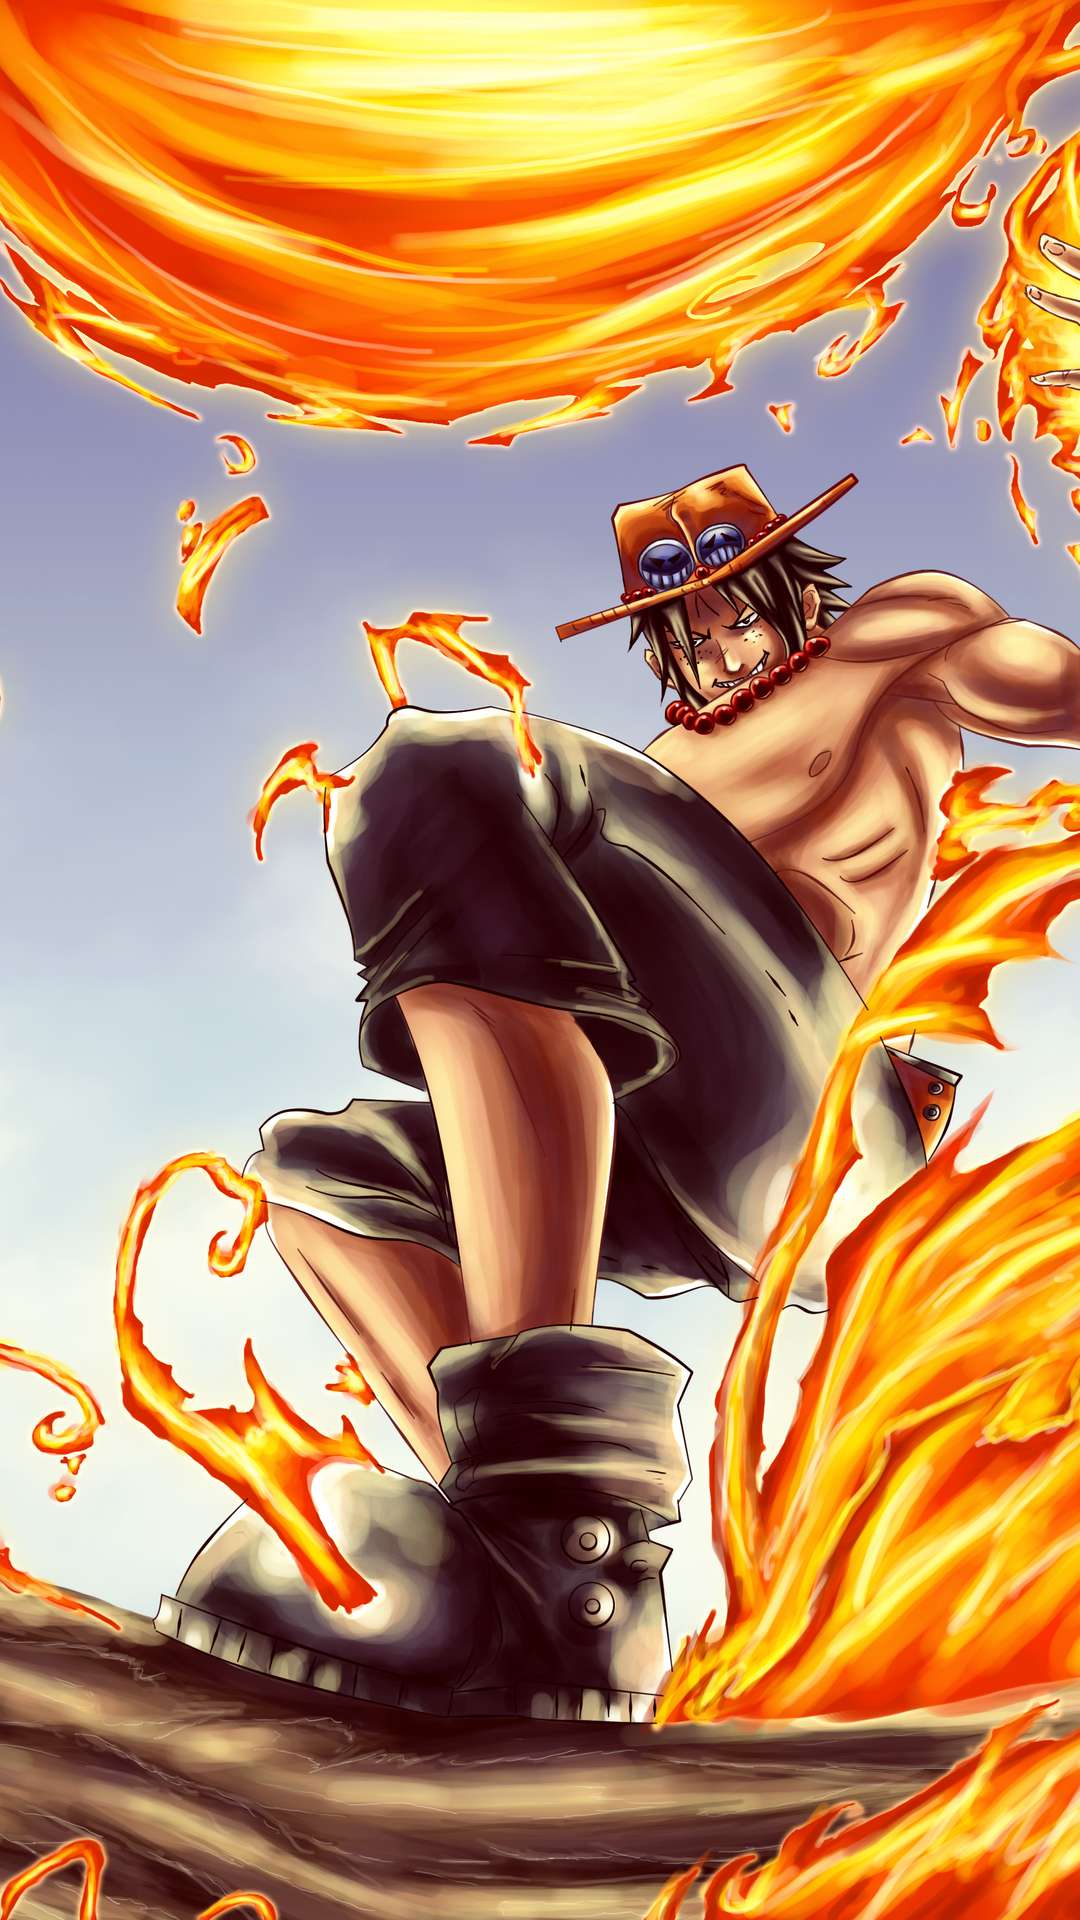 Wallpaper ID 297504  Anime One Piece Phone Wallpaper Portgas D Ace  1668x2388 free download